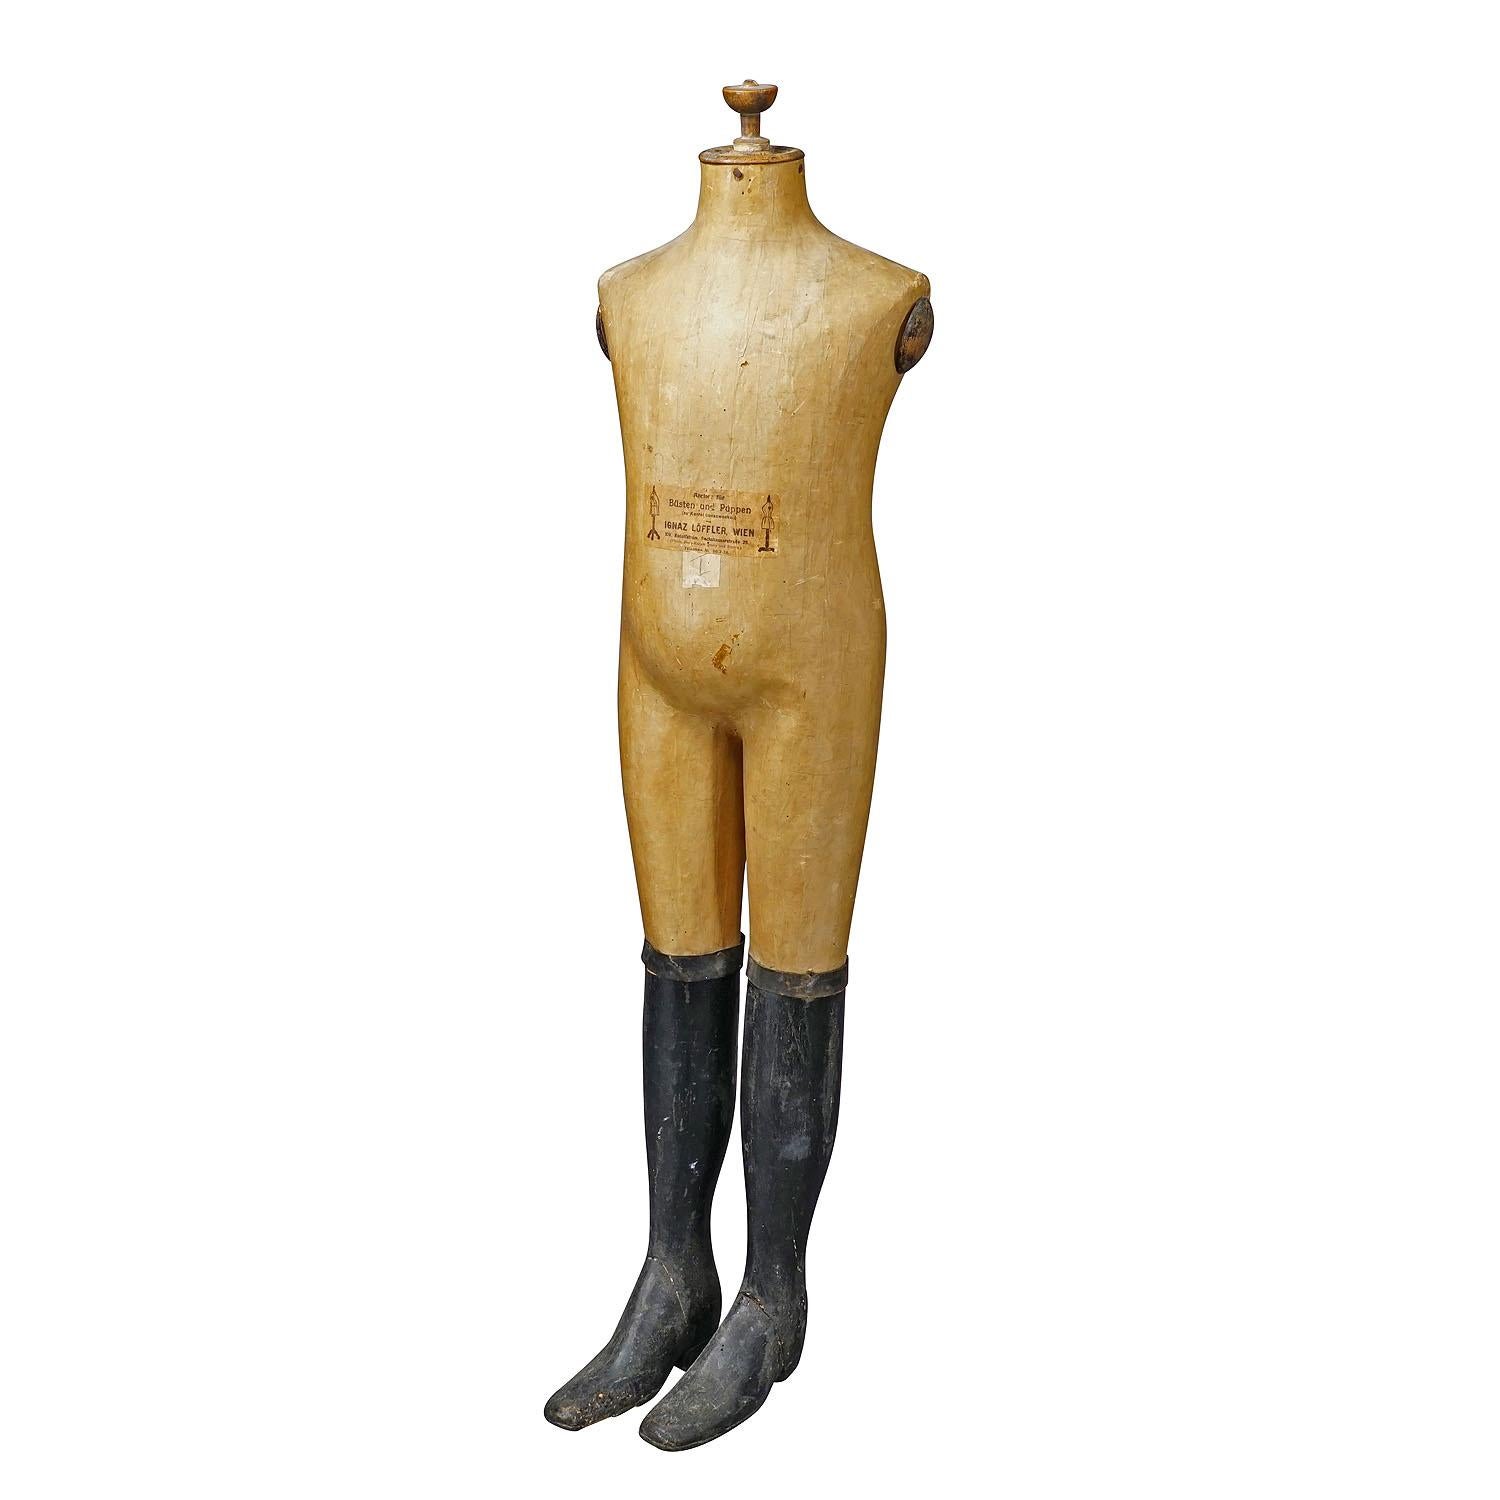 Antique Tailor's Mannequin for Children, Vienna 19th Century

An antique late 19th century children tailor's mannequin made by Ignatz Loeffler, Vienna. Made of paper, fabric and wood. Good unrestored condition.

artfour is an owner-managed trading